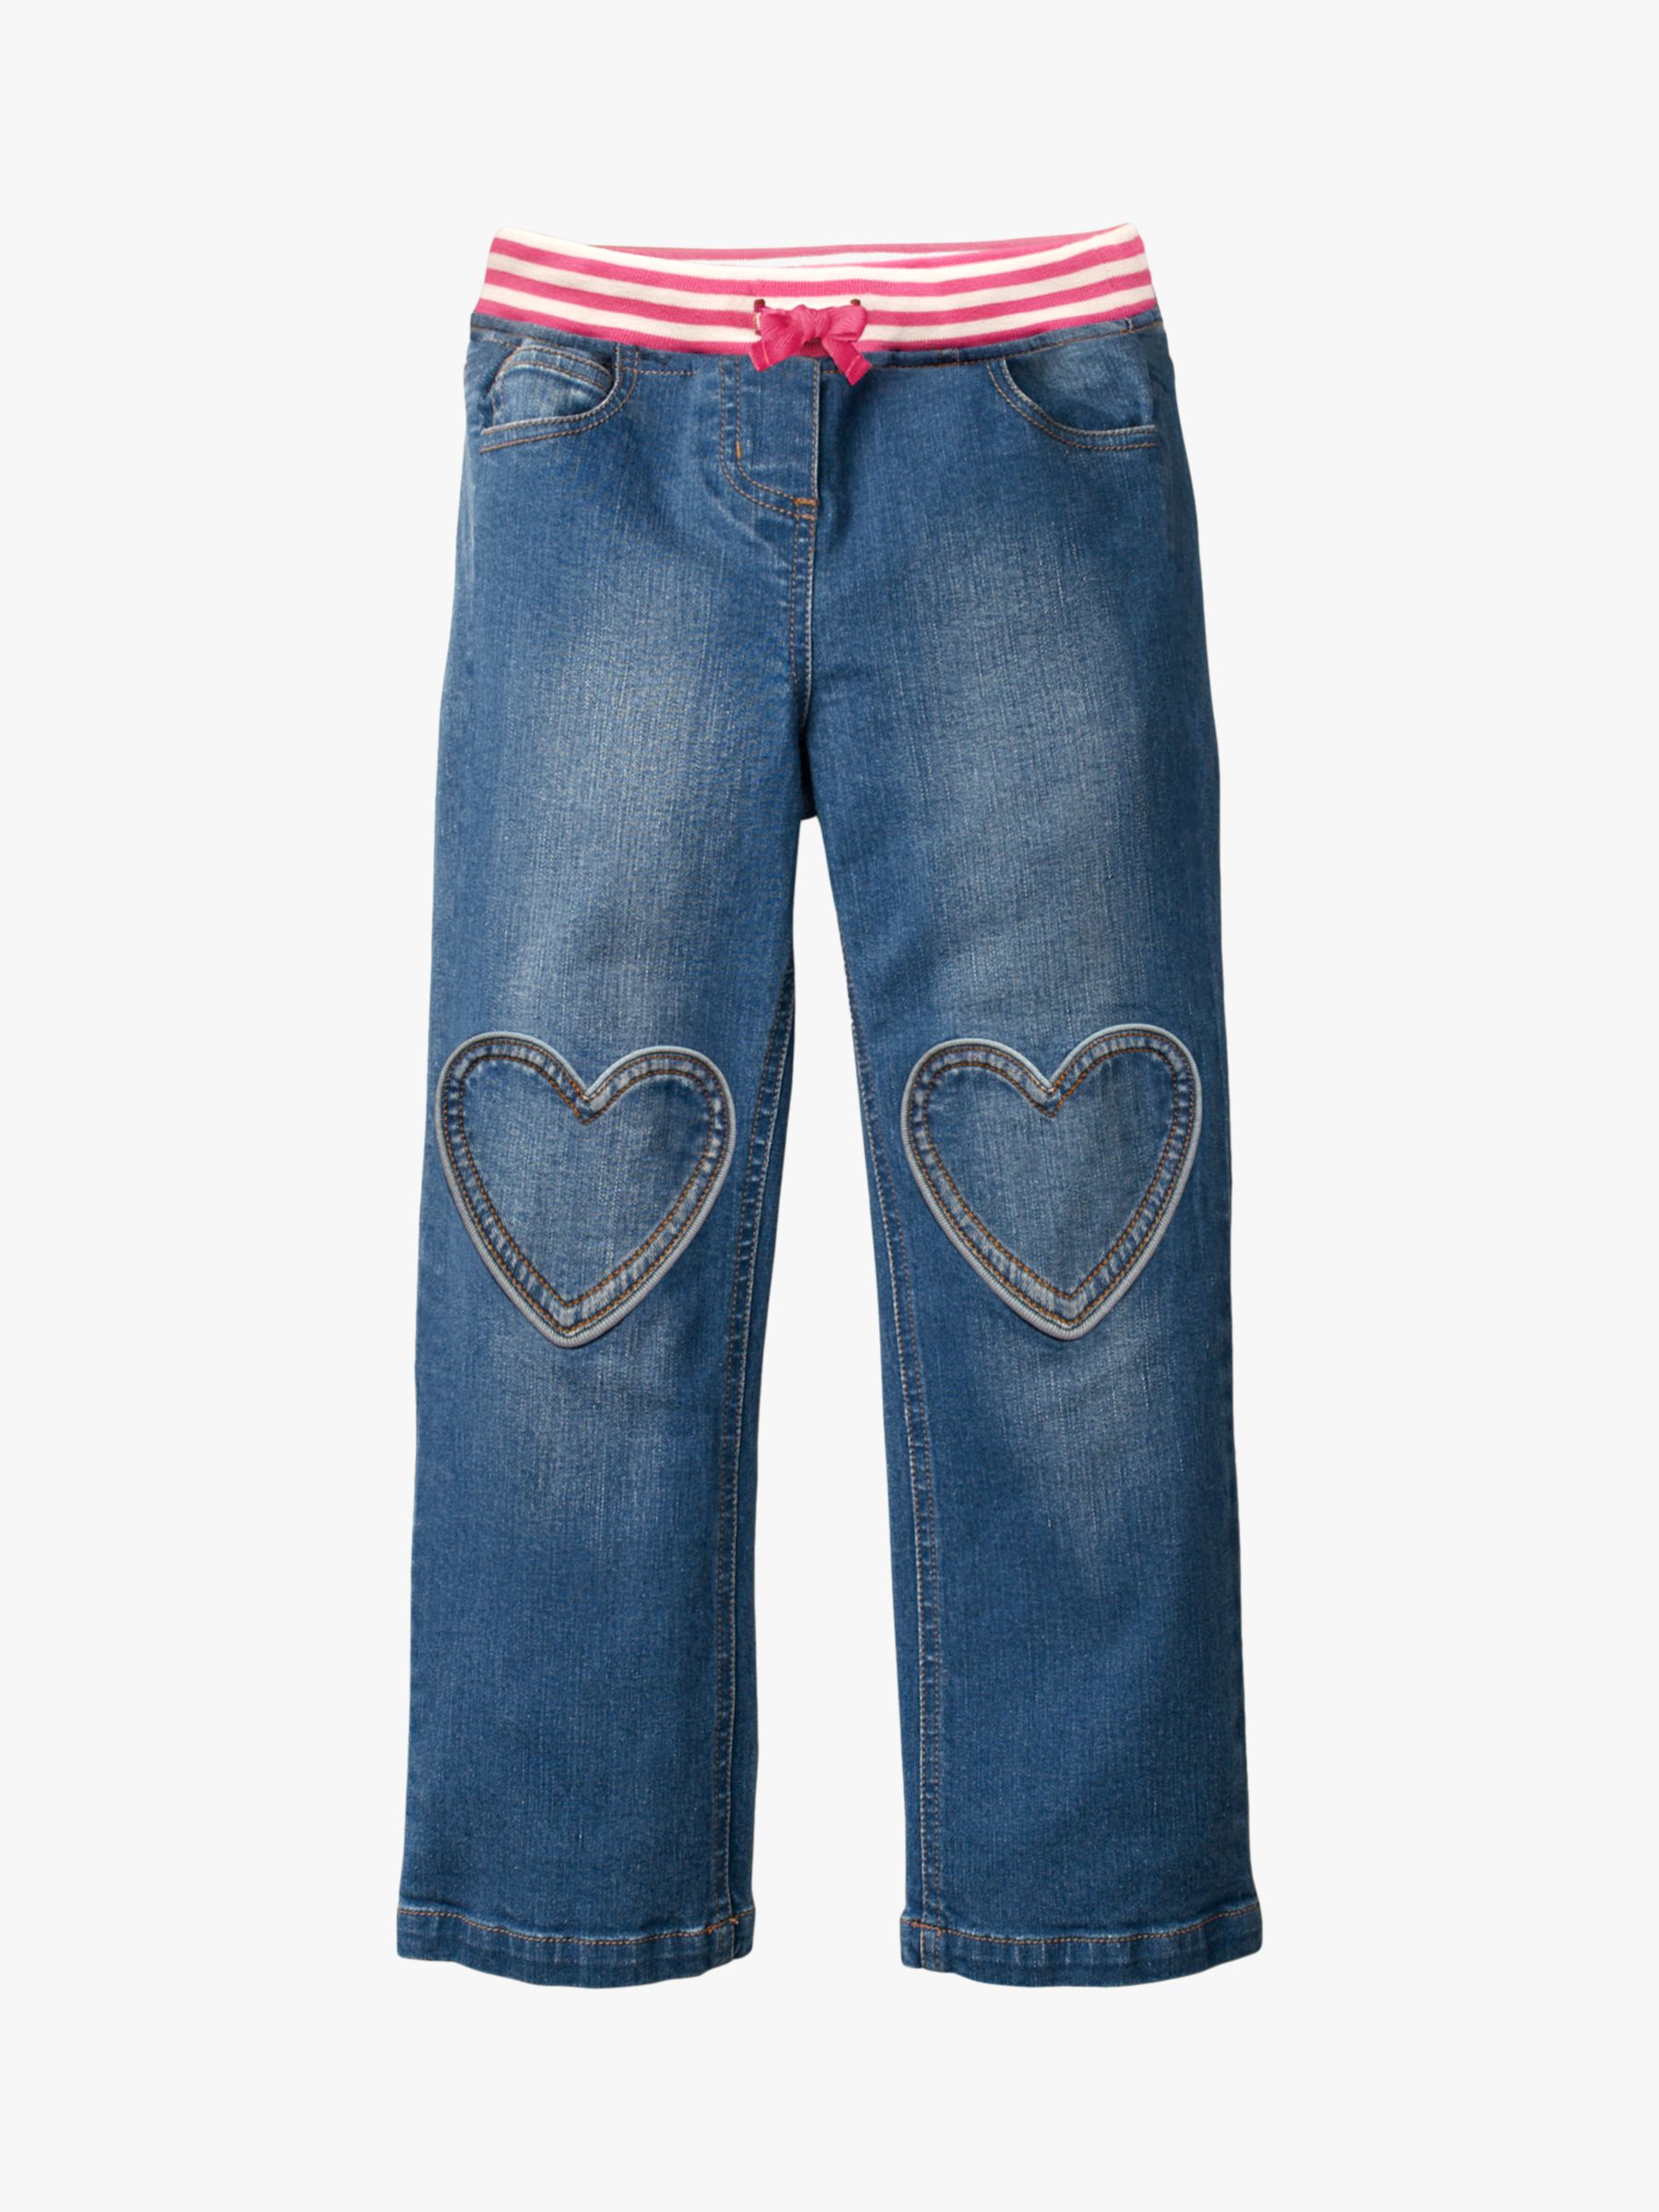 Image of Mini Boden Girls Heart Patch Jeans Denim